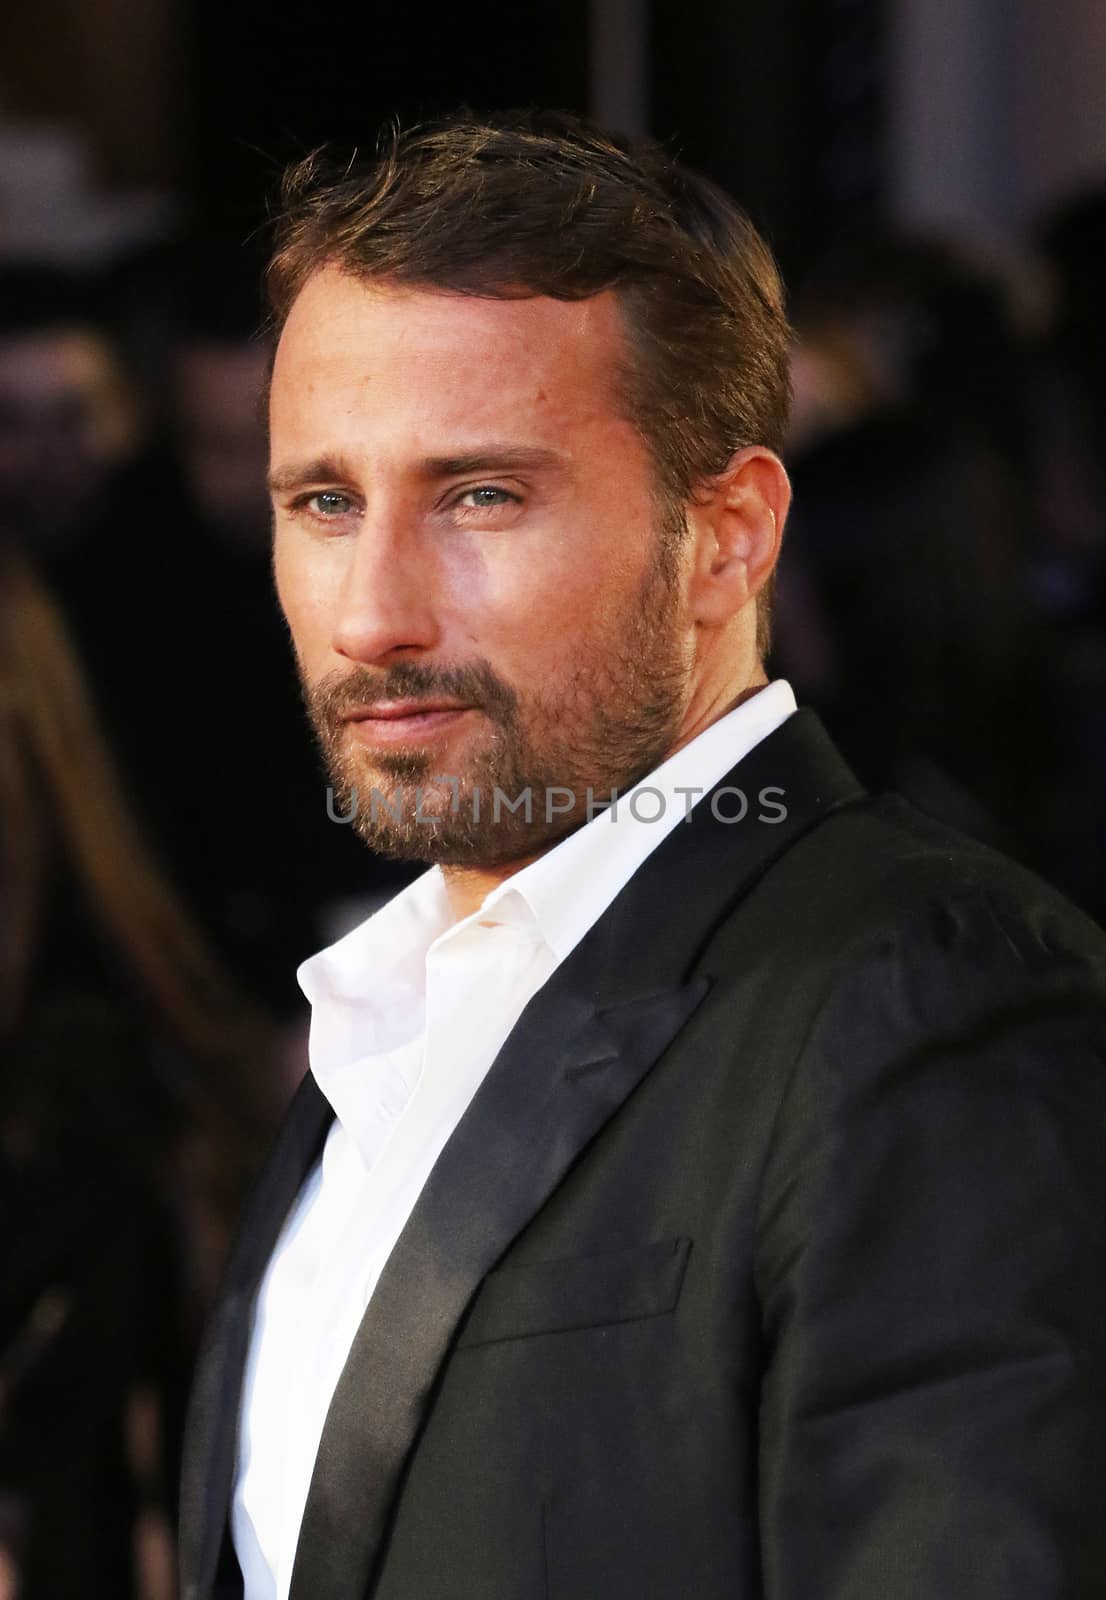 UNITED KINGDOM, London: Matthias Schoenaerts attends the UK premiere of The Danish Girl at Odeon Leicester Square in London on December 8, 2015. 